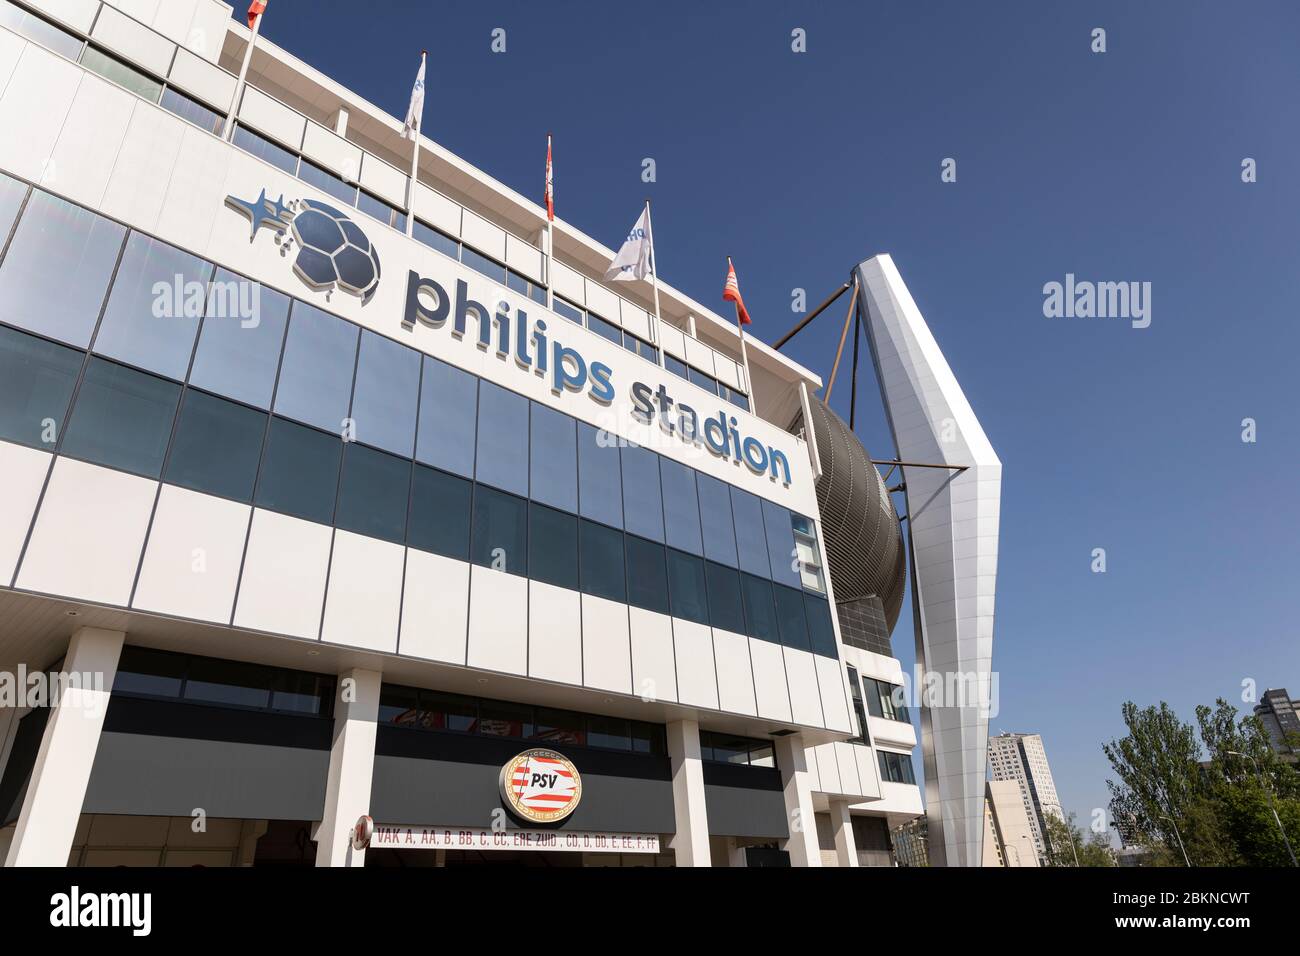 Eindhoven, The Netherlands, April 21st 2020. Exterior facade of the logo of the Philips Stadion, the third-largest Dutch football stadium in the count Stock Photo